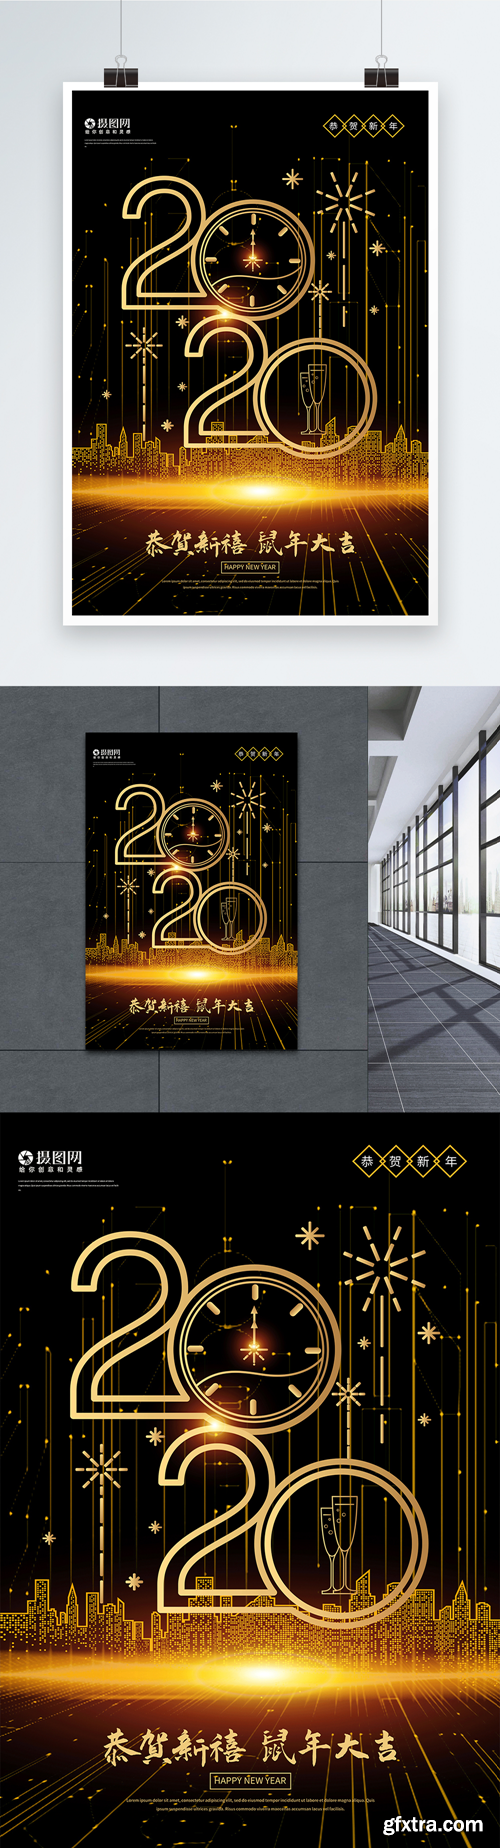 2020 black gold new year poster